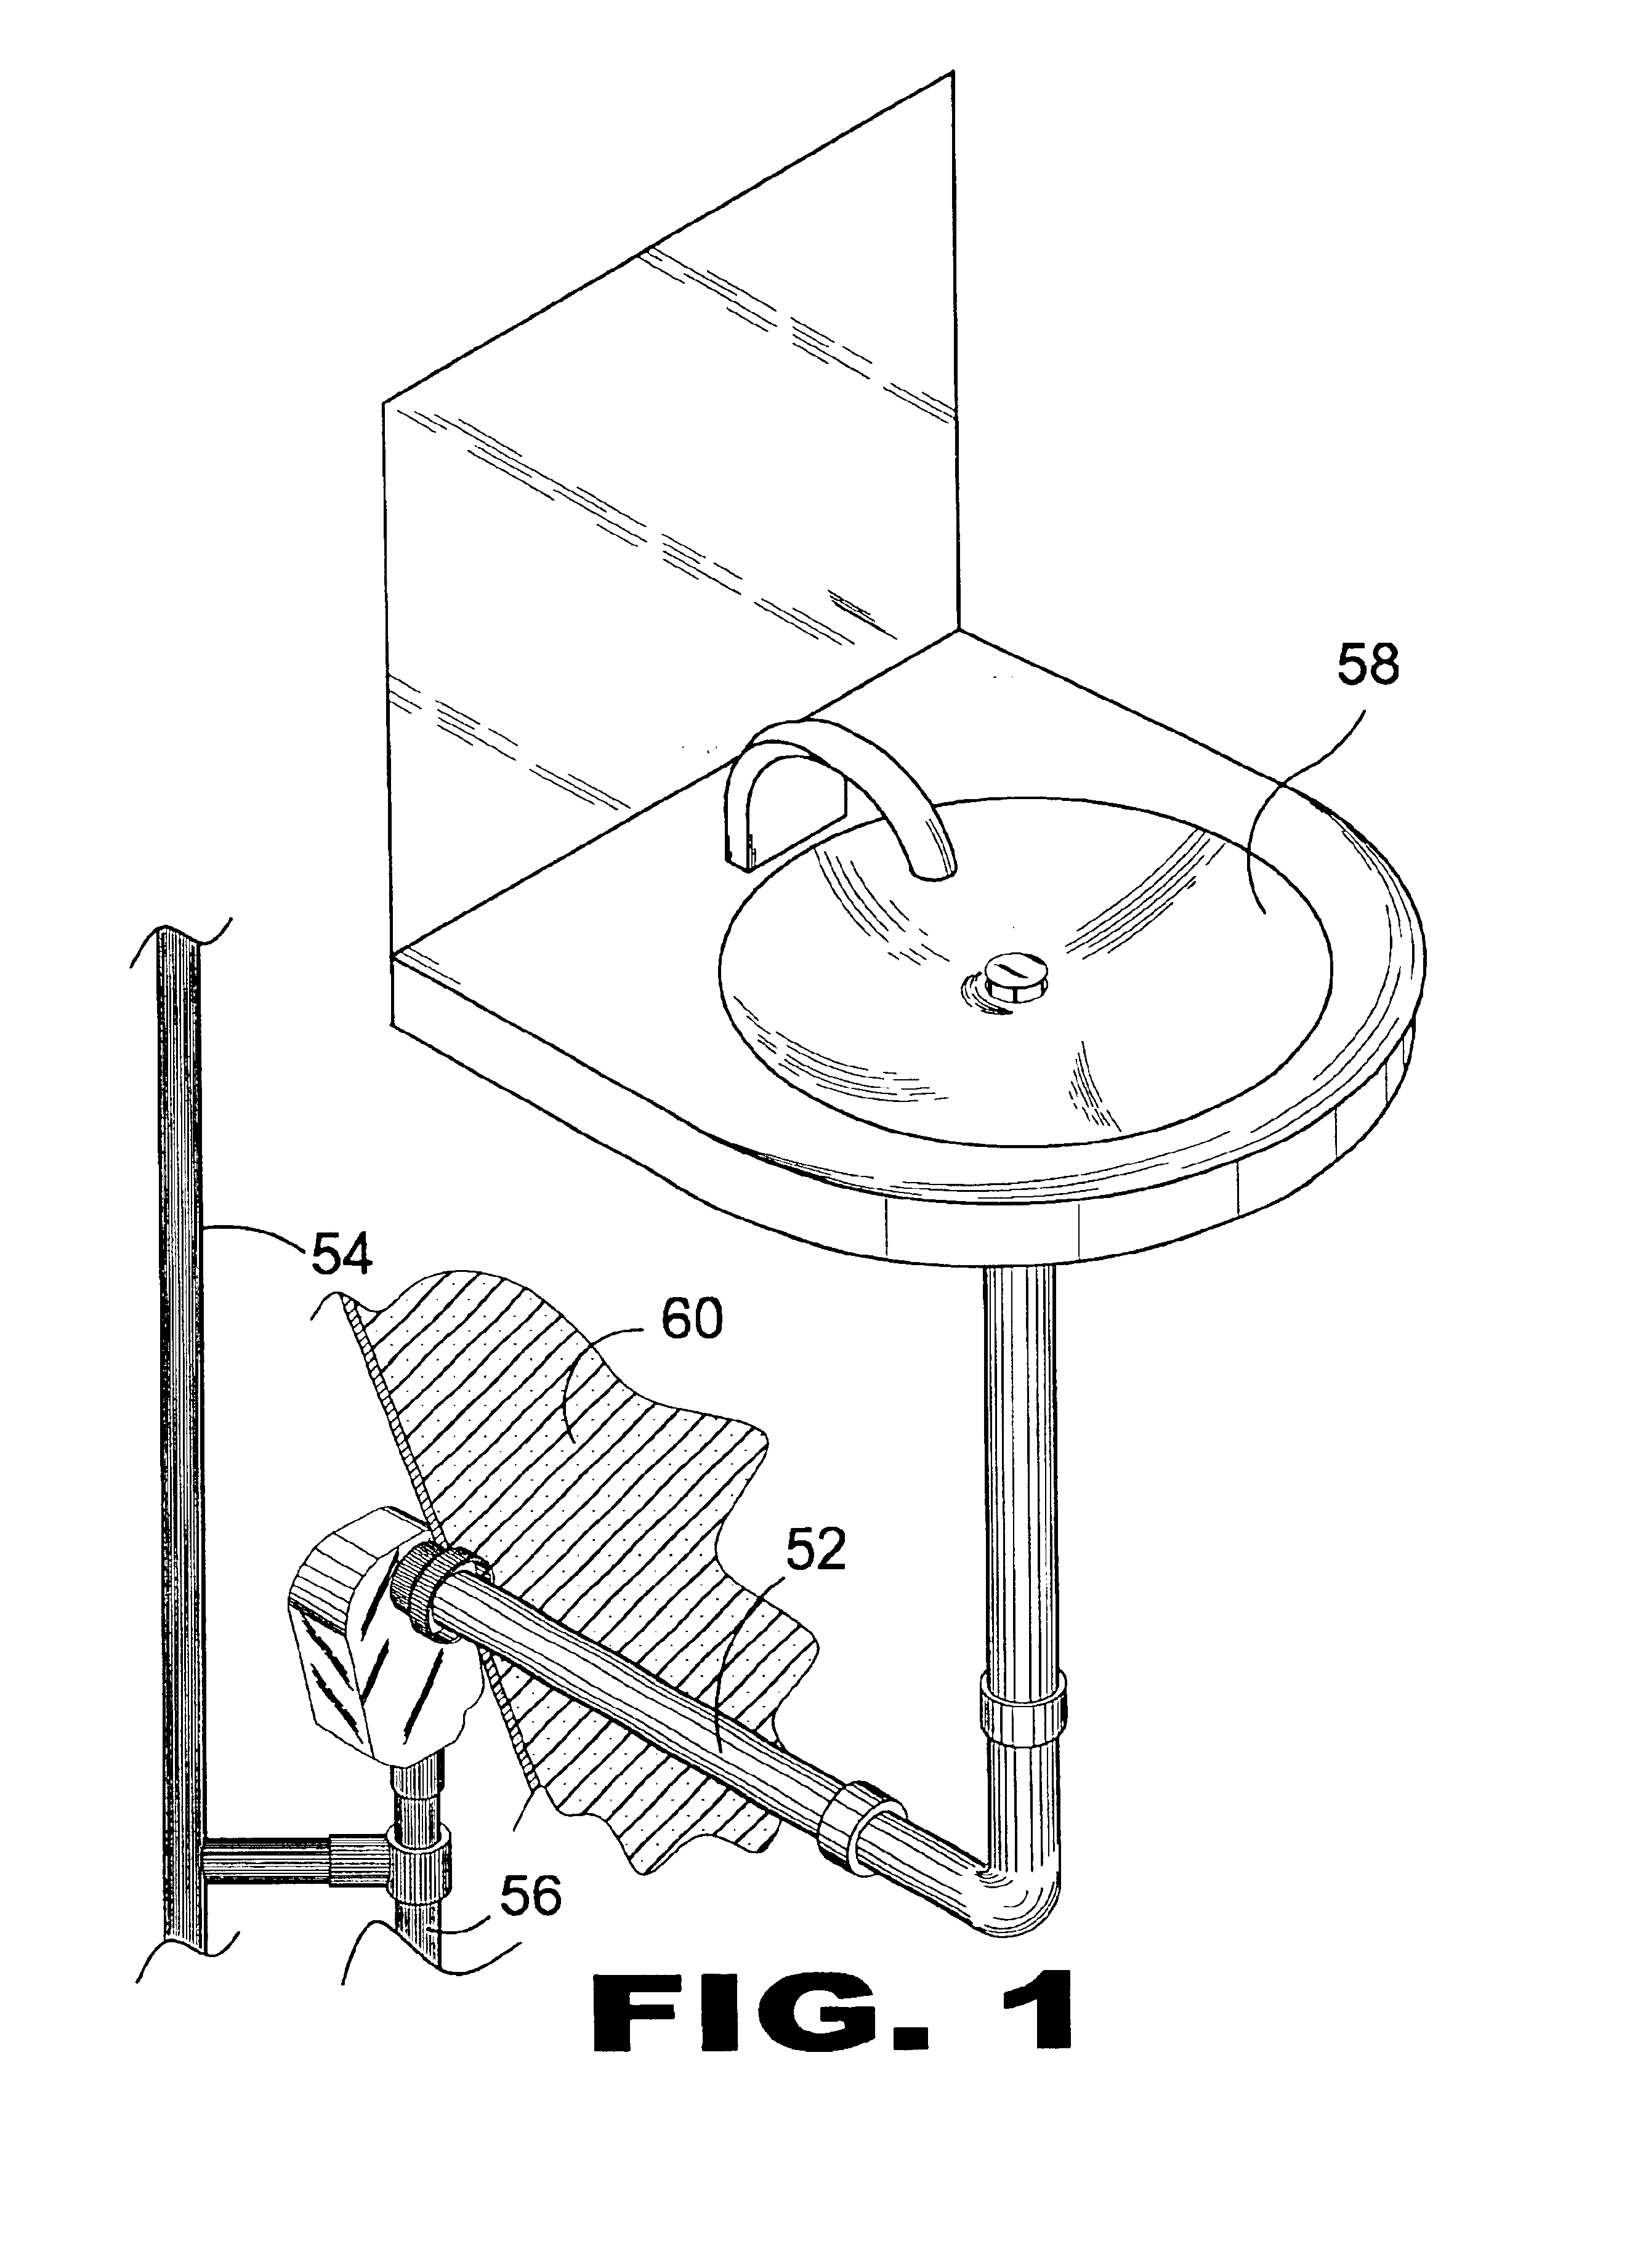 In-the-wall plumbing trap with integral waste and vent line